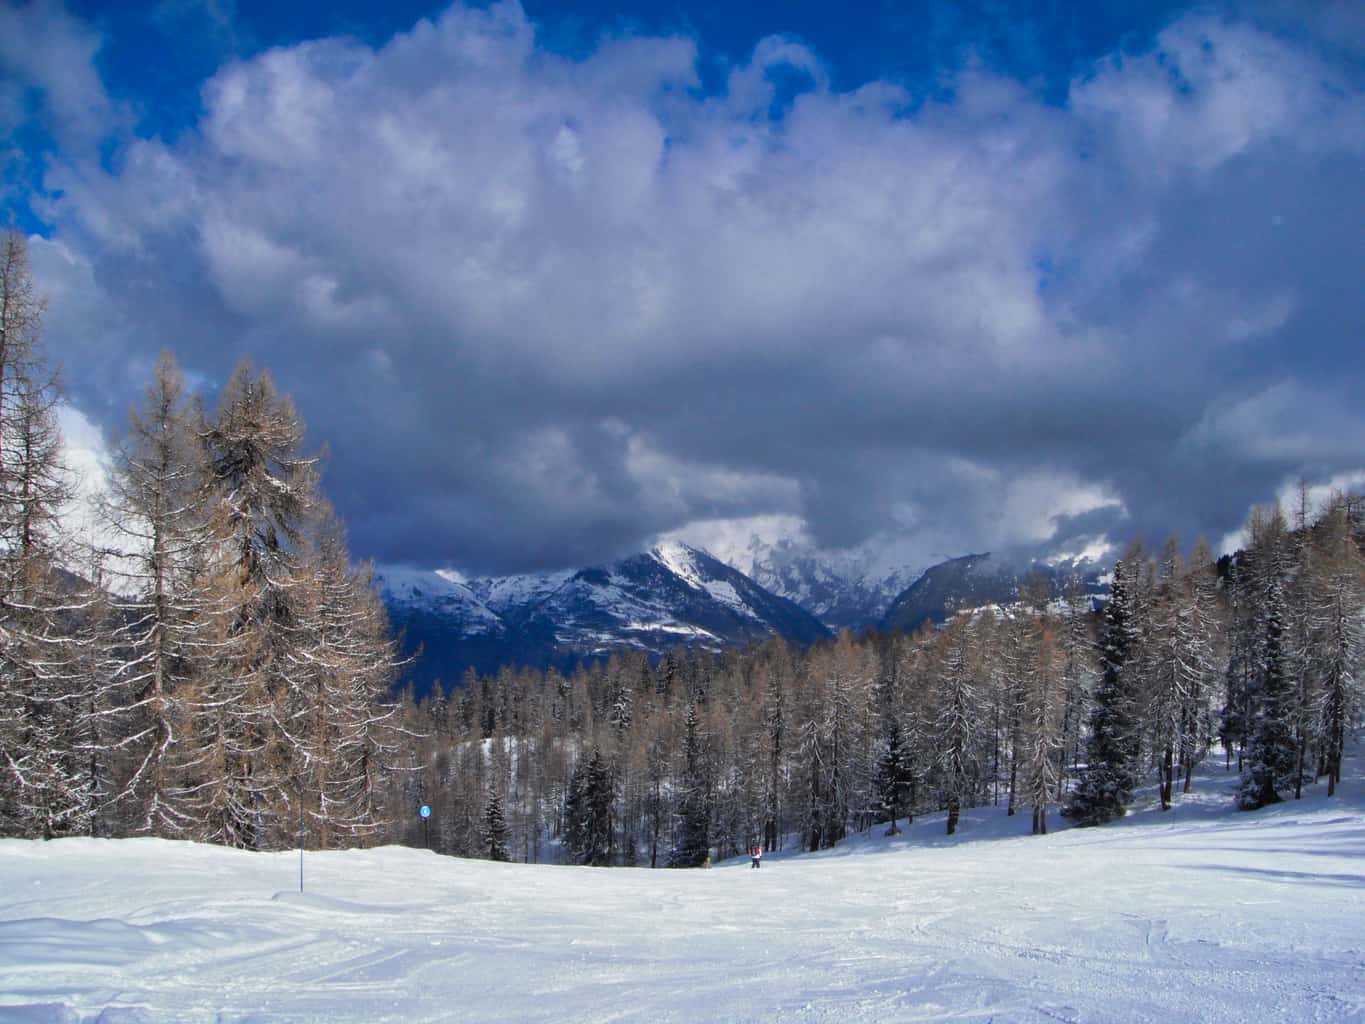 Ski slops with snowy trees with snowy mountains in the background